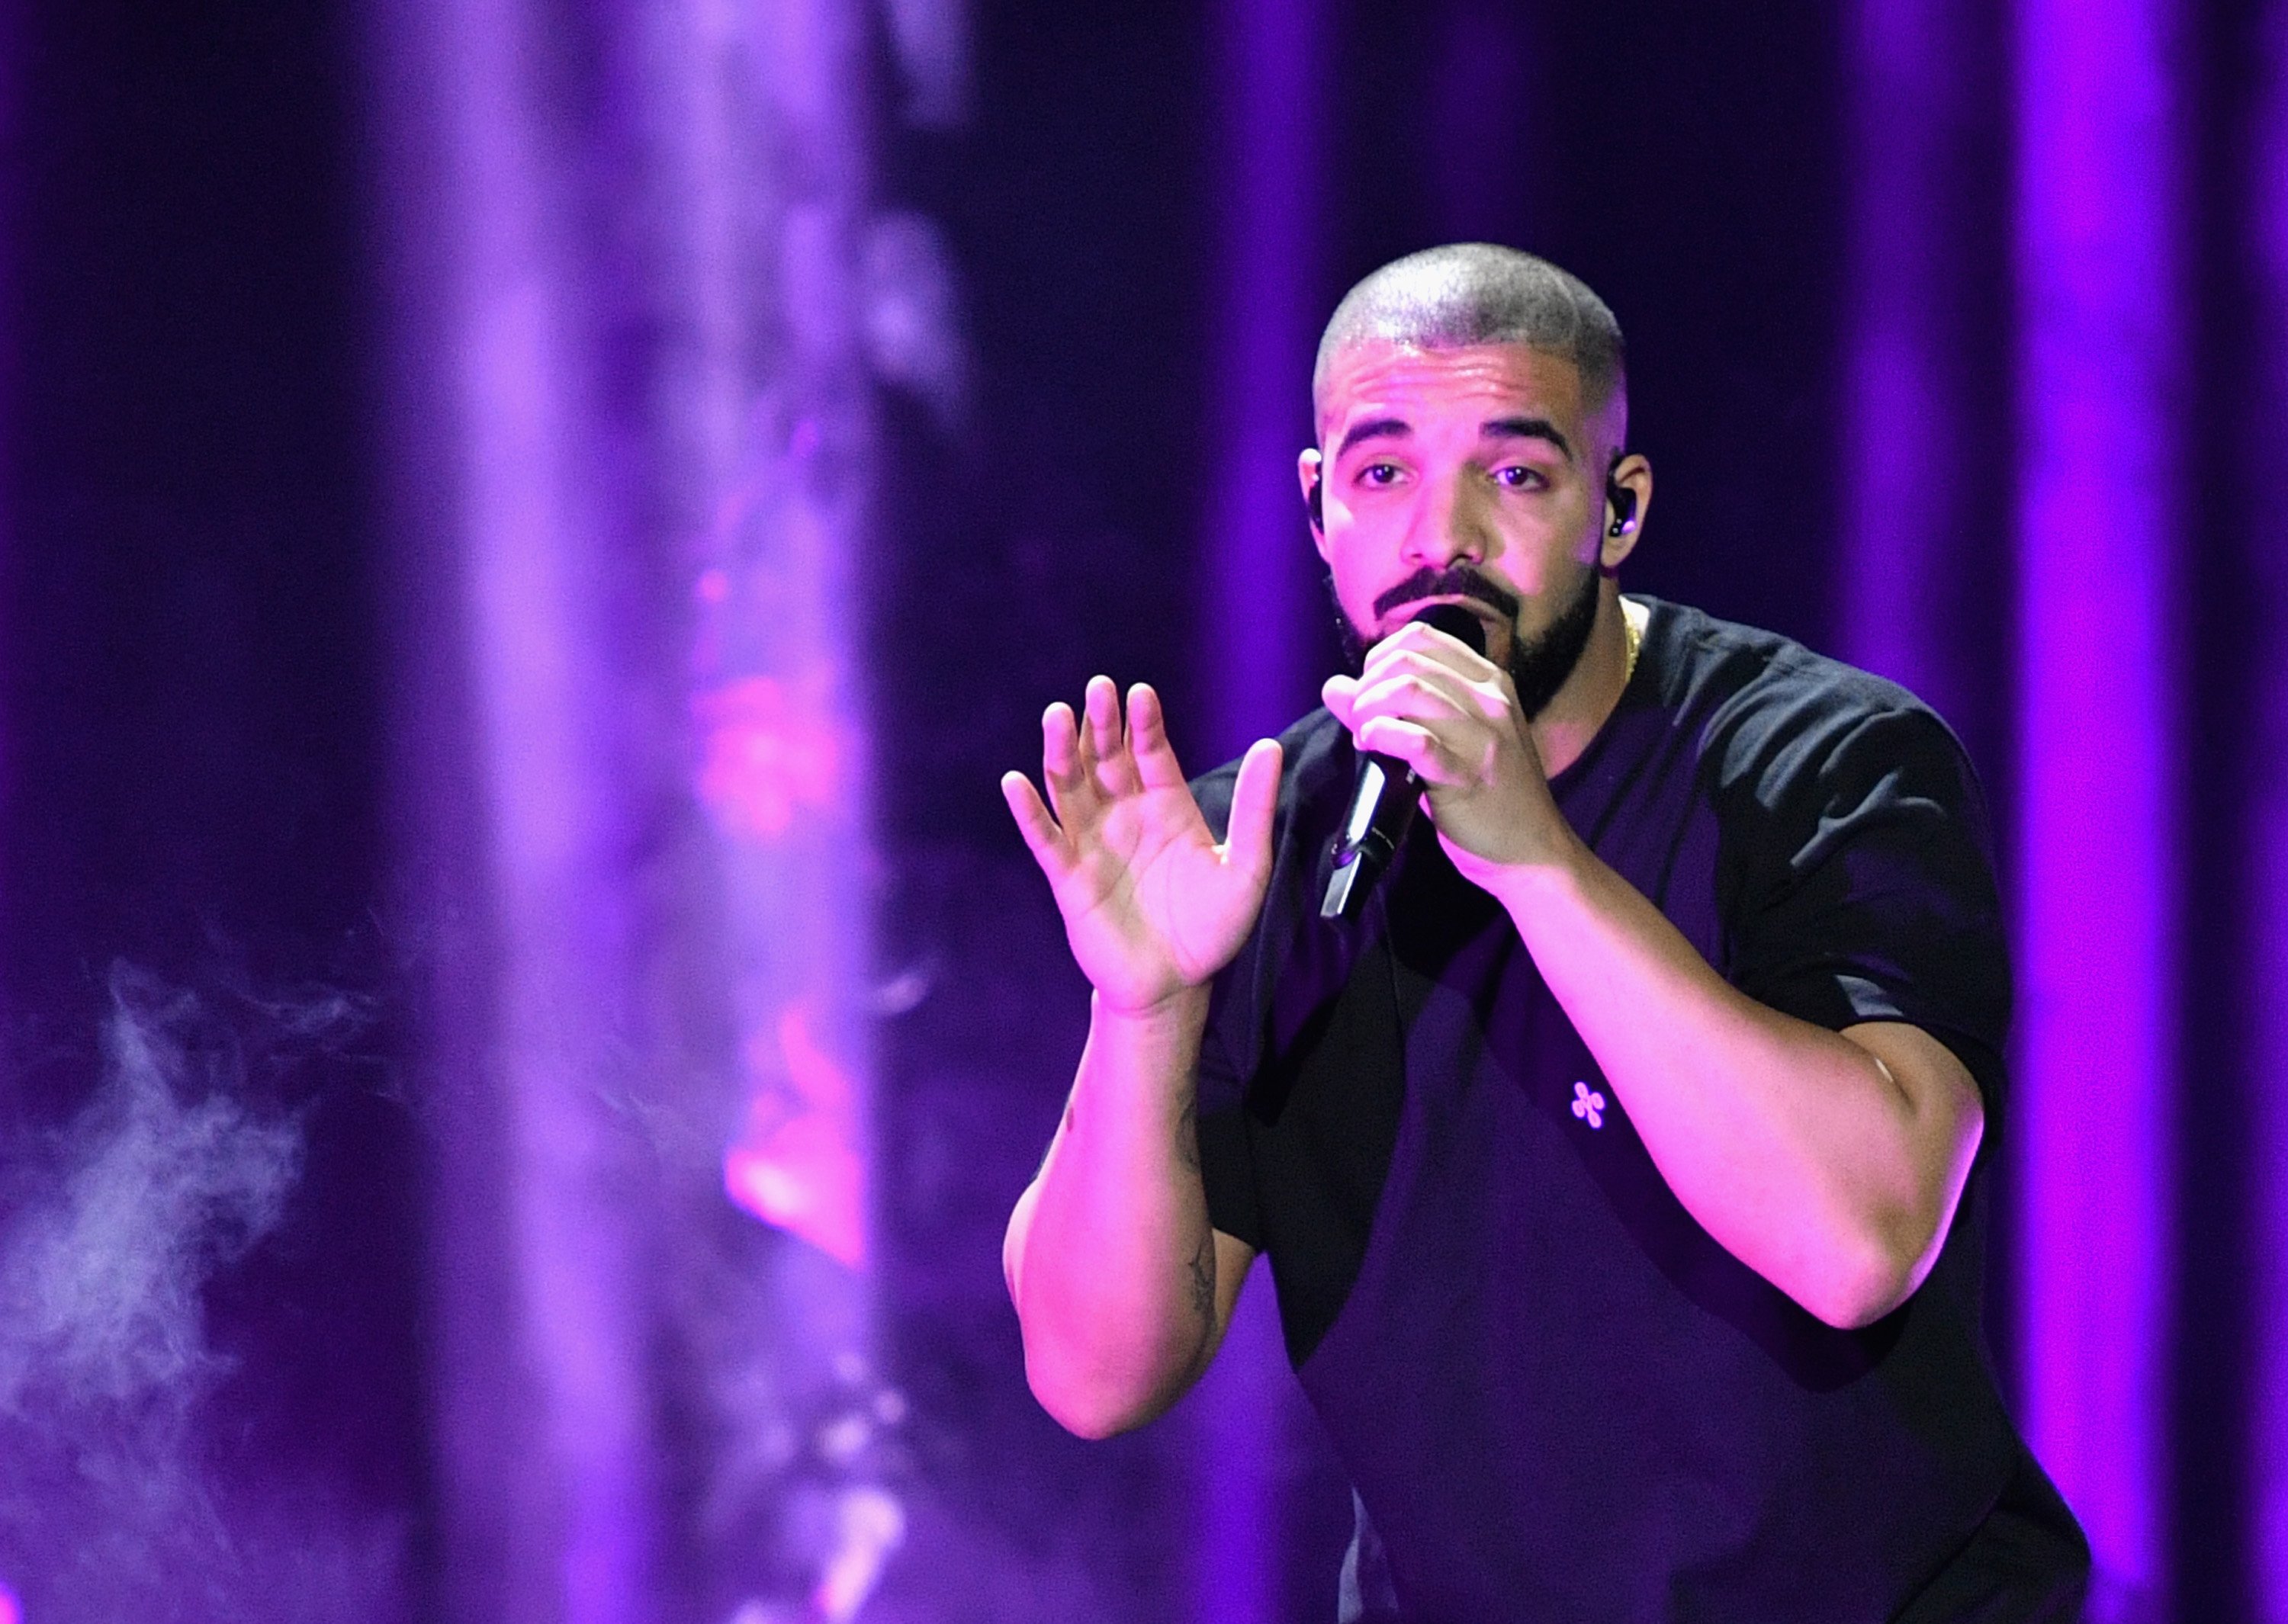 Drake performs onstage at the 2016 iHeartRadio Music Festival at T-Mobile Arena on September 23, 2016 in Las Vegas